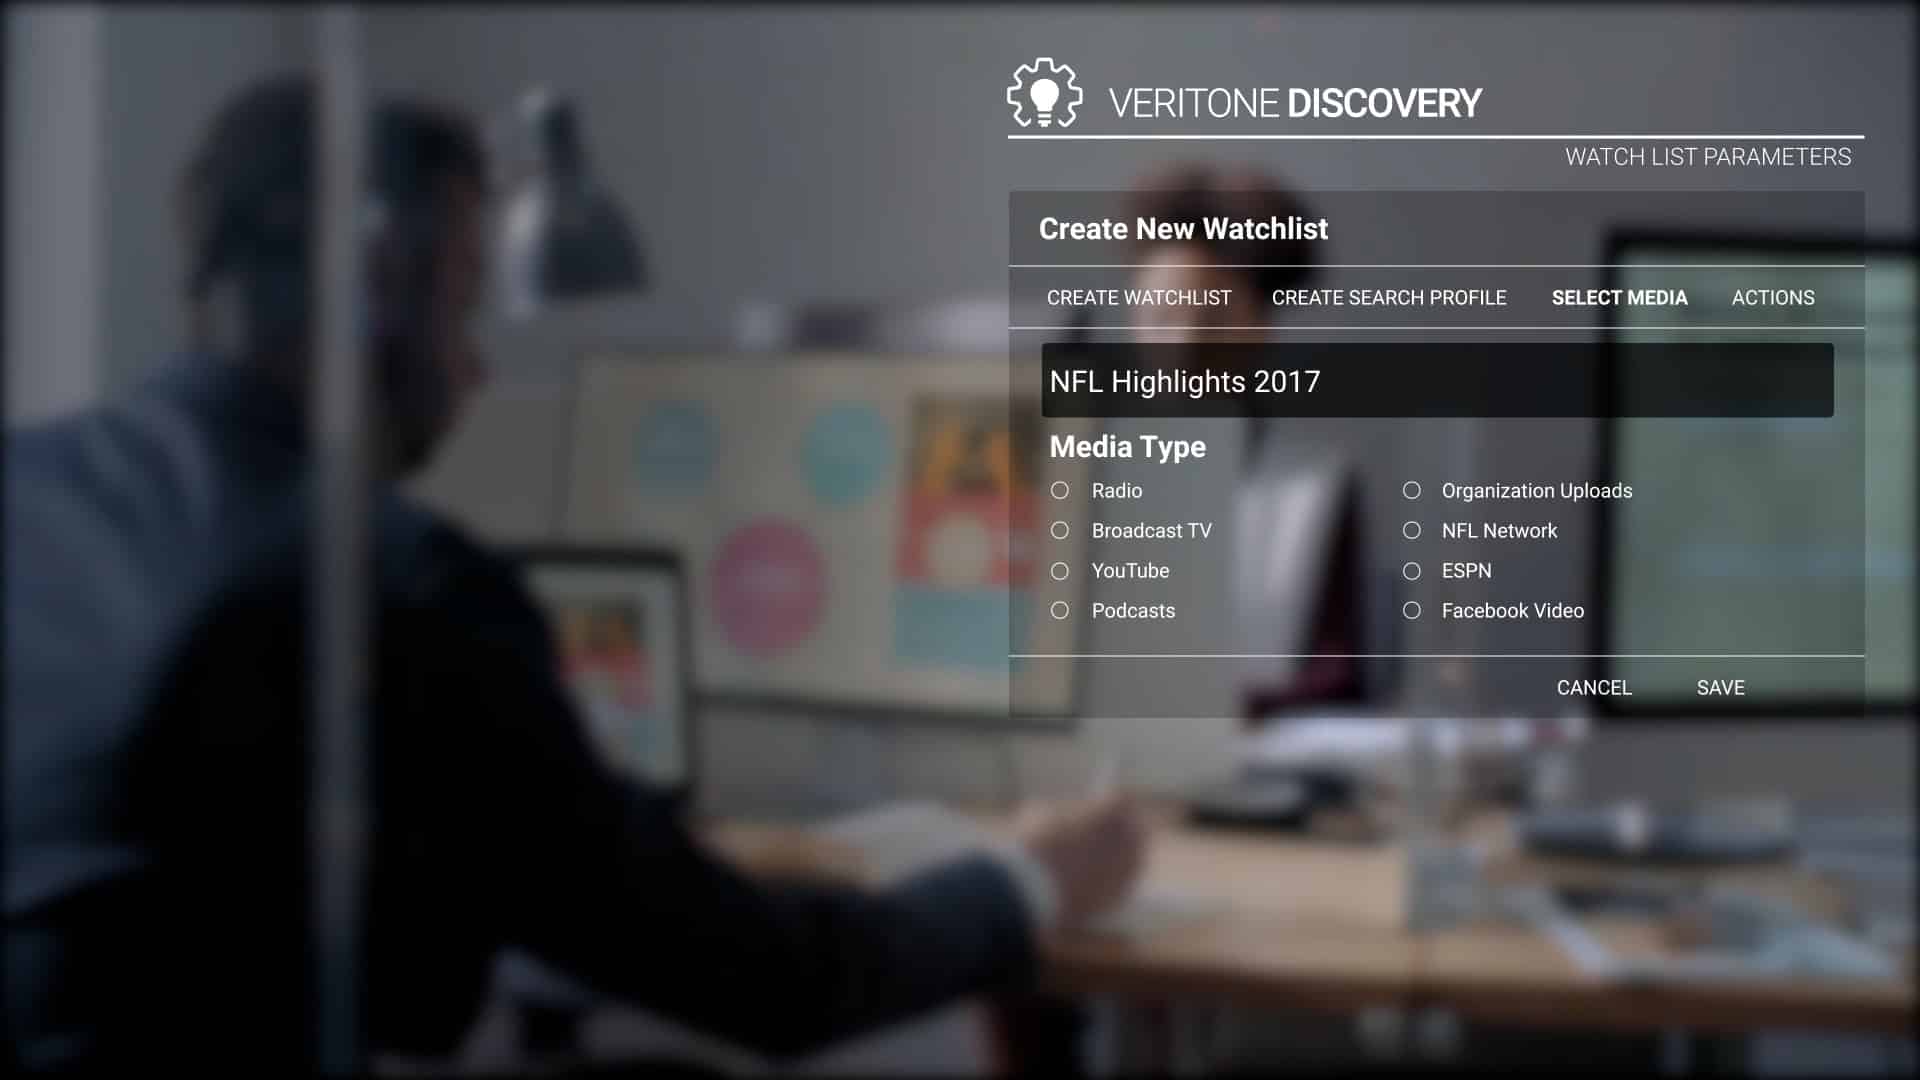 An images describing the Veritone Discovery AI-based clip search system